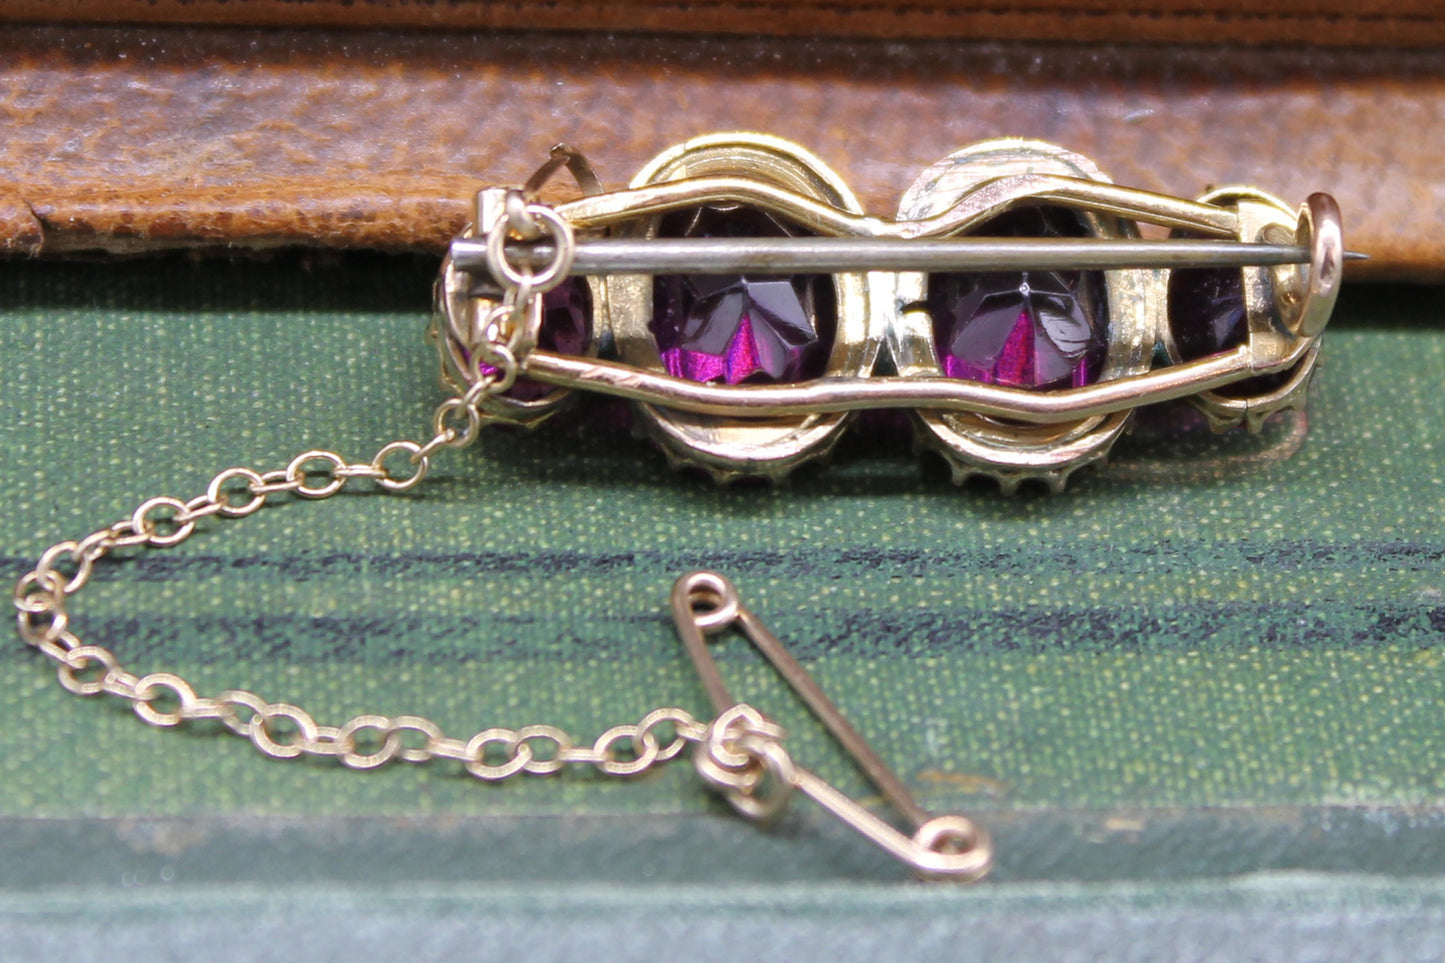 Antique Edwardian Gold Brooch with 4 Good sized Amethyst